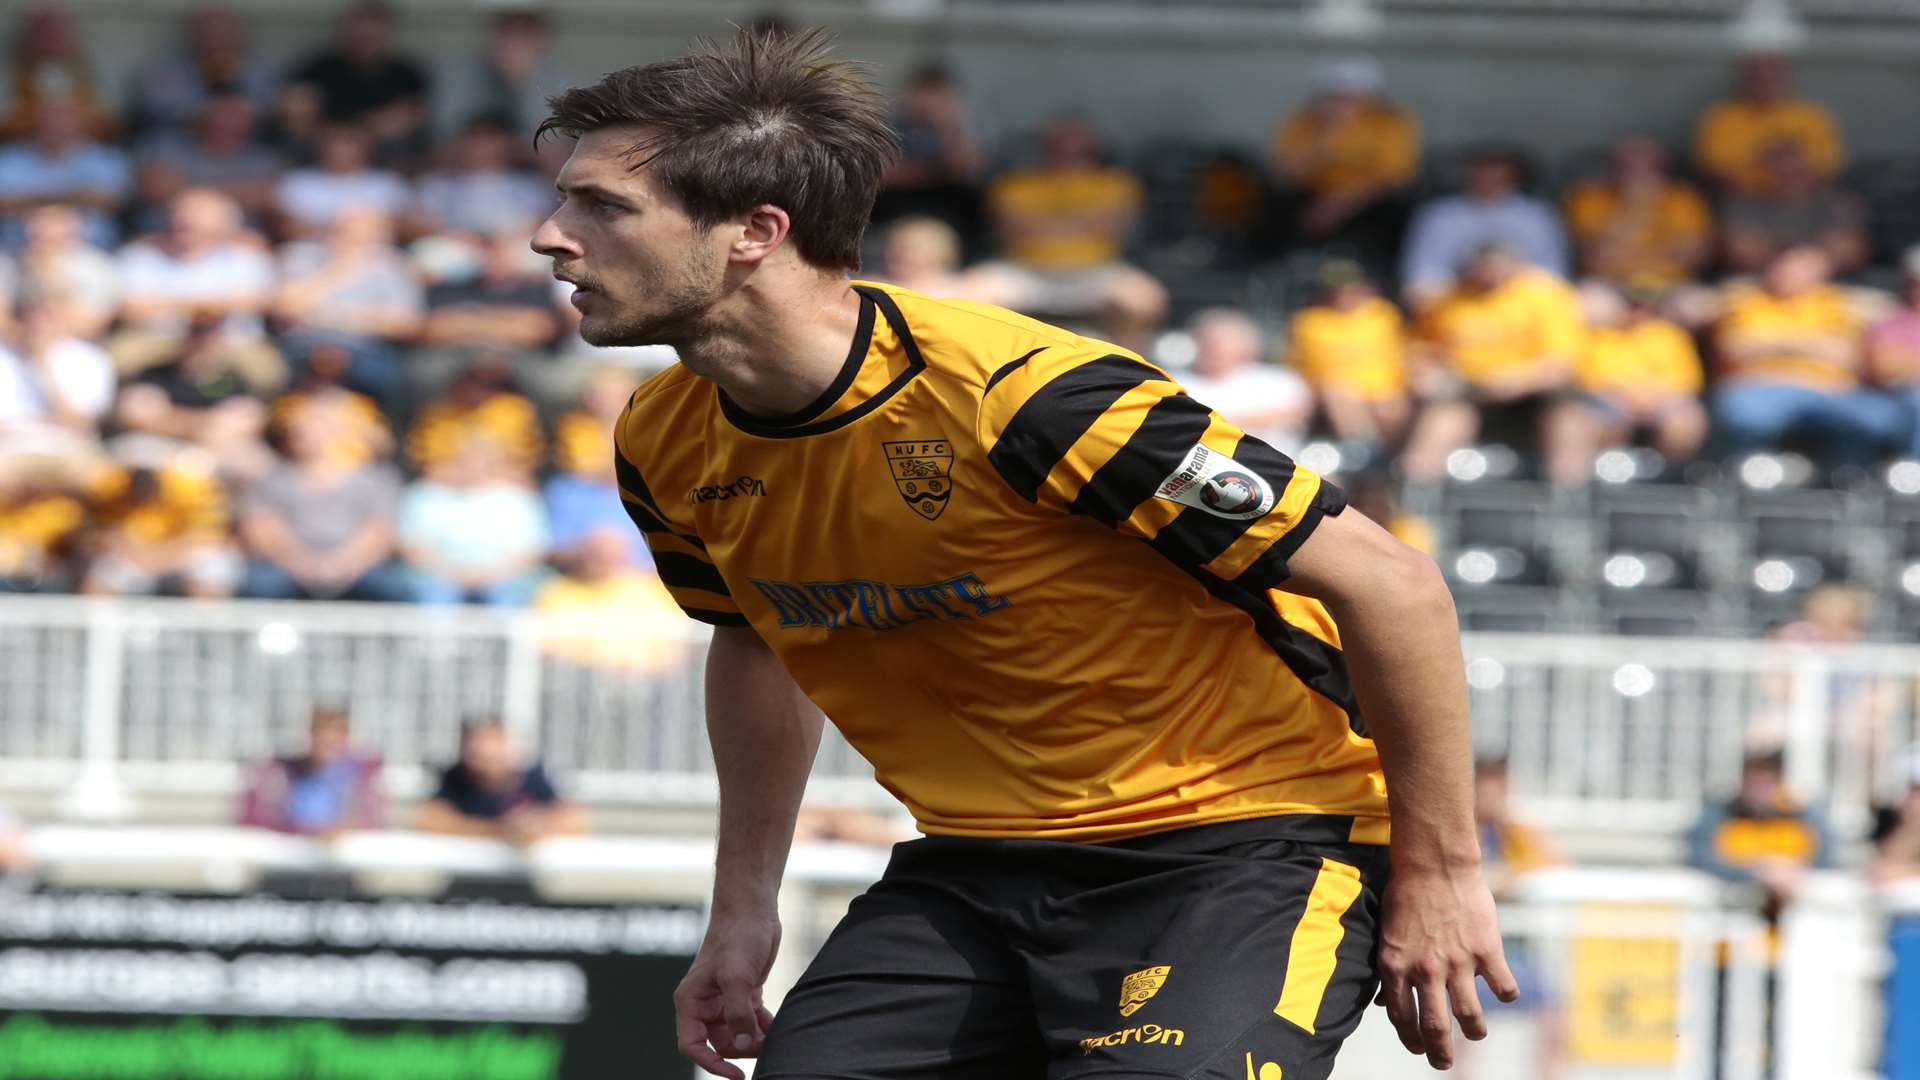 Joe Healy returned from injury for Maidstone Picture: Martin Apps